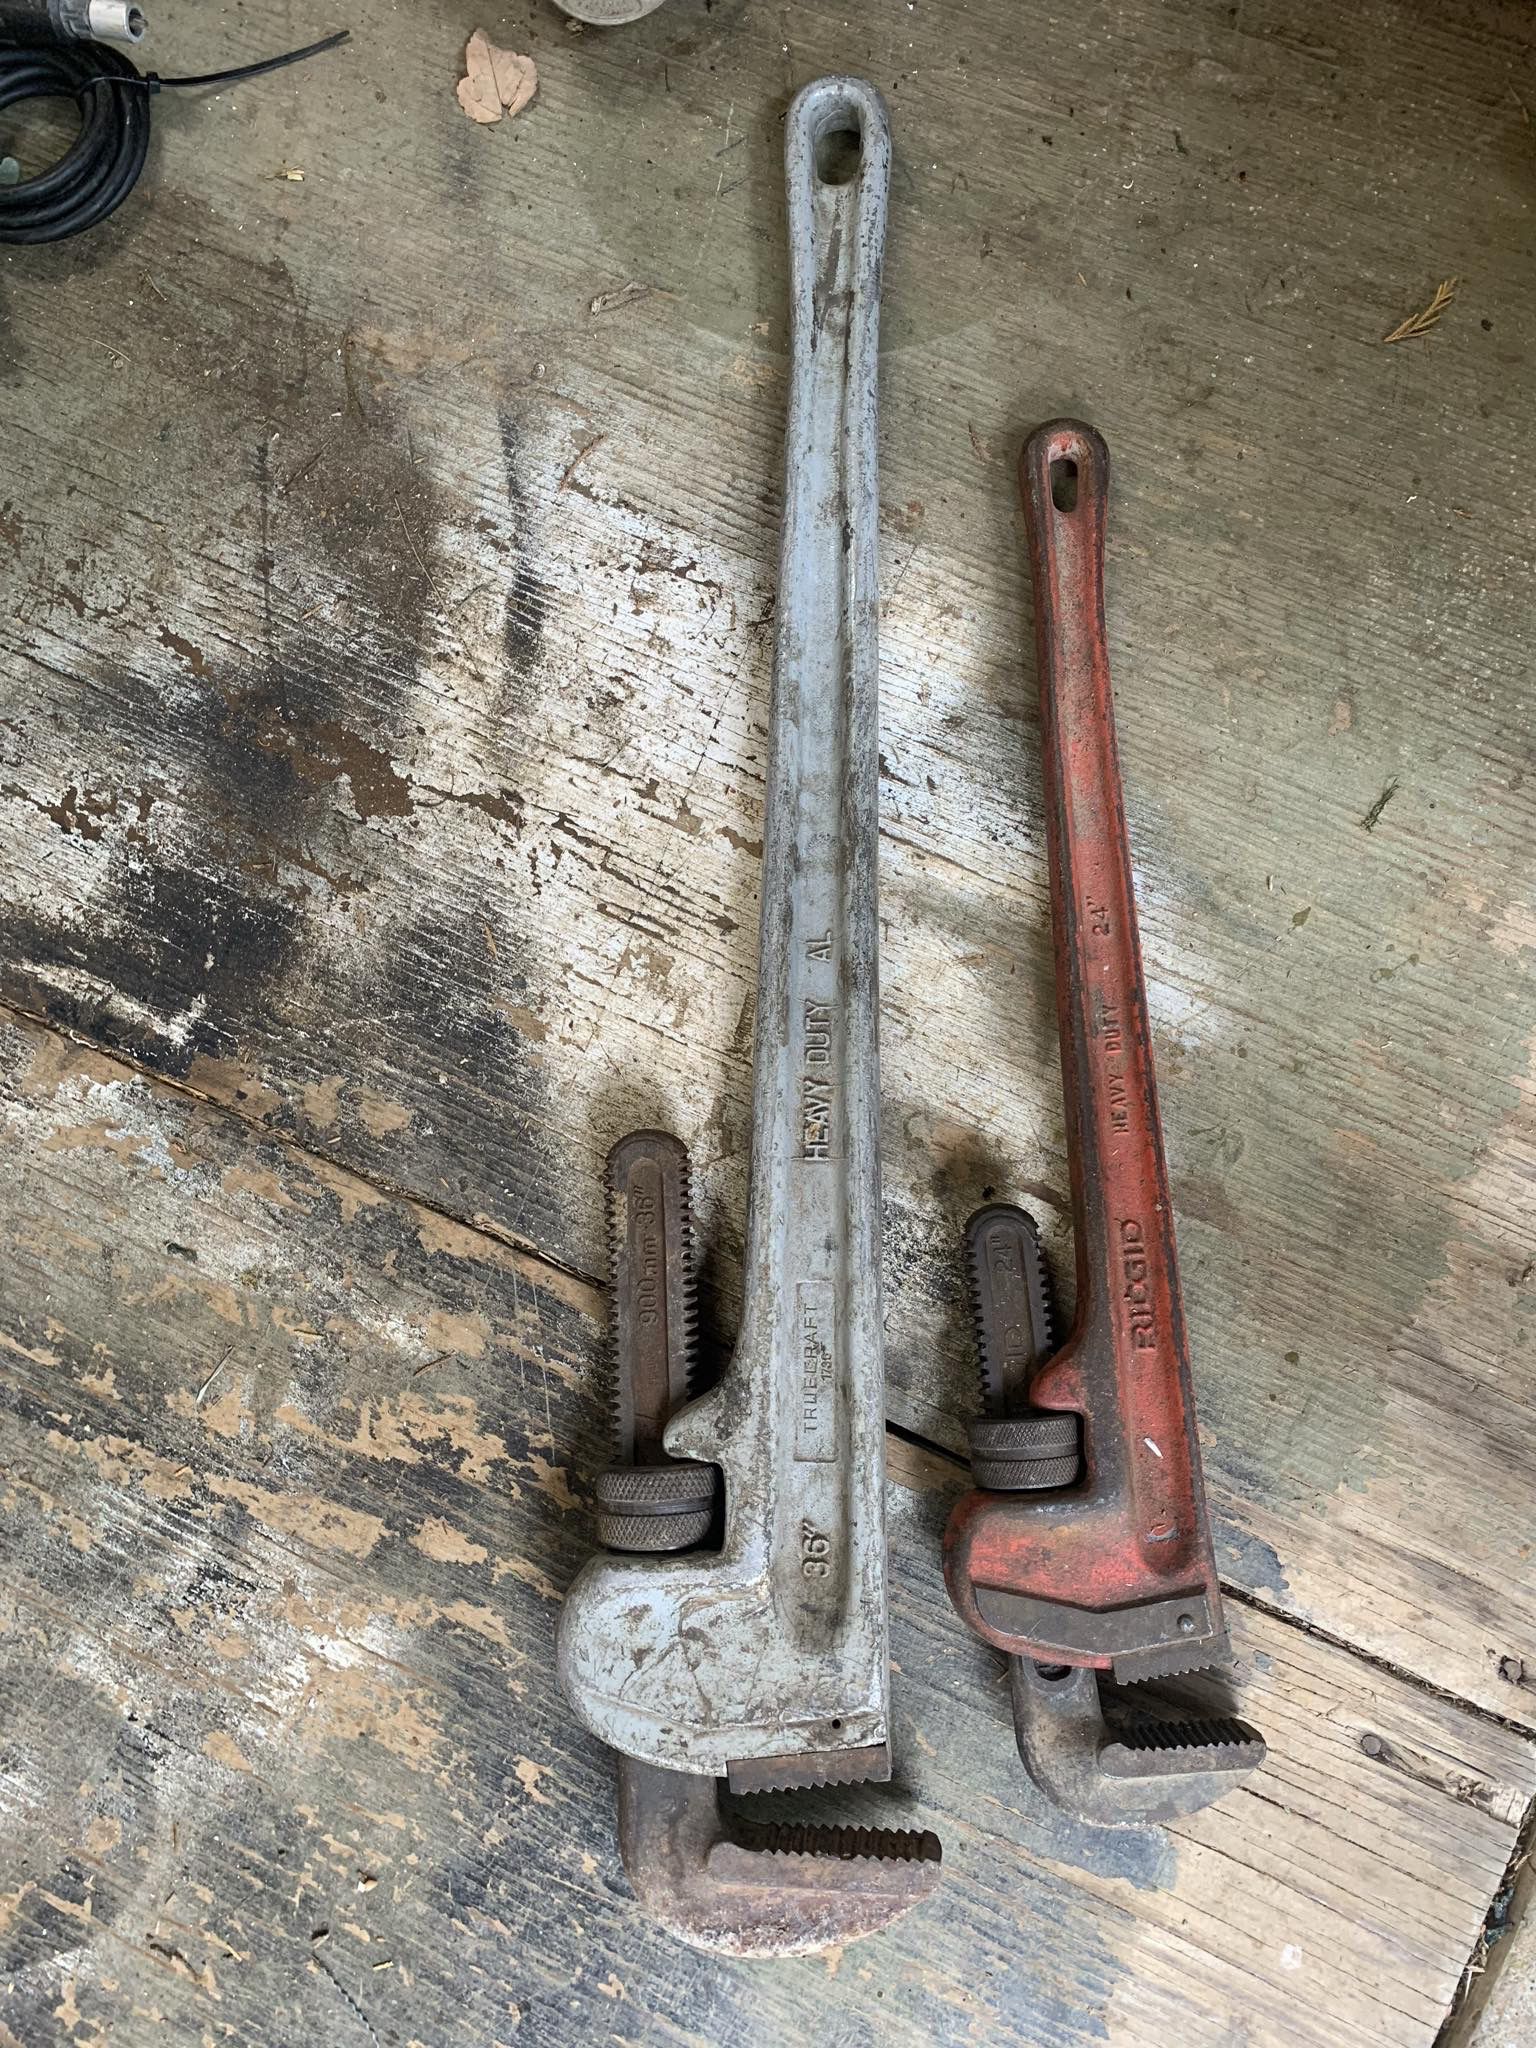 2 pipe wrenches 